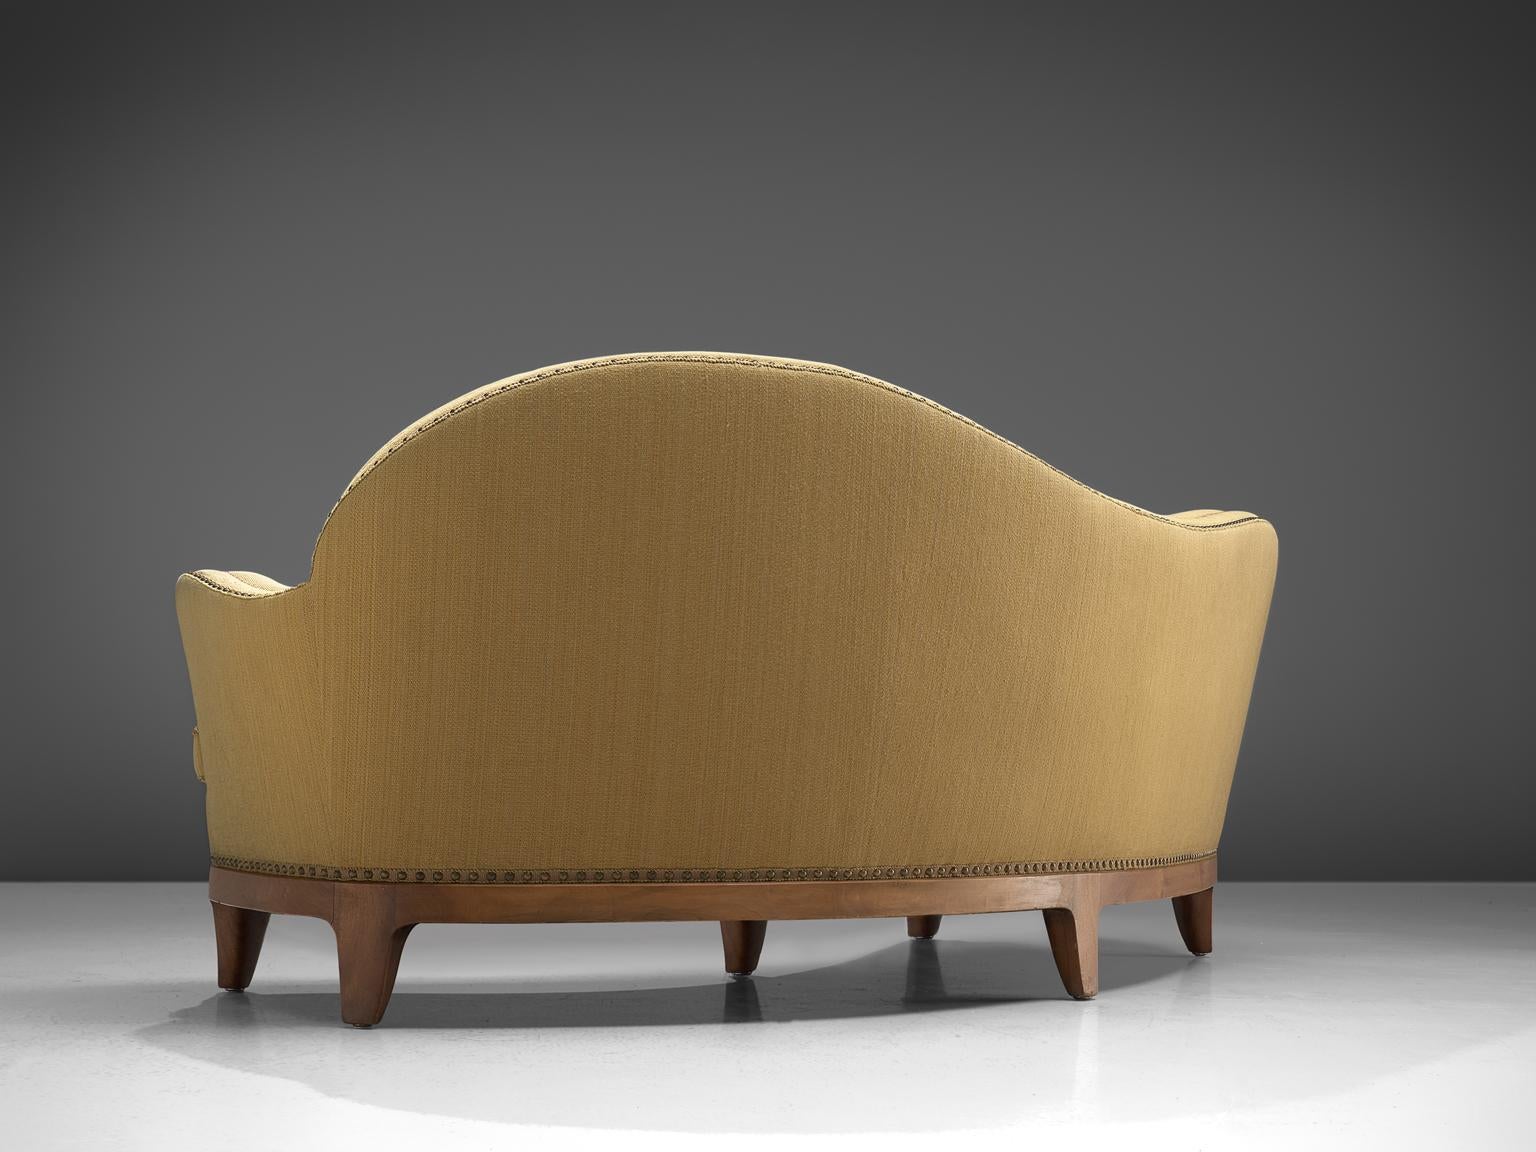 Fabric Rare French Curved Sofa with Asymmetrical Backrest, 1930s